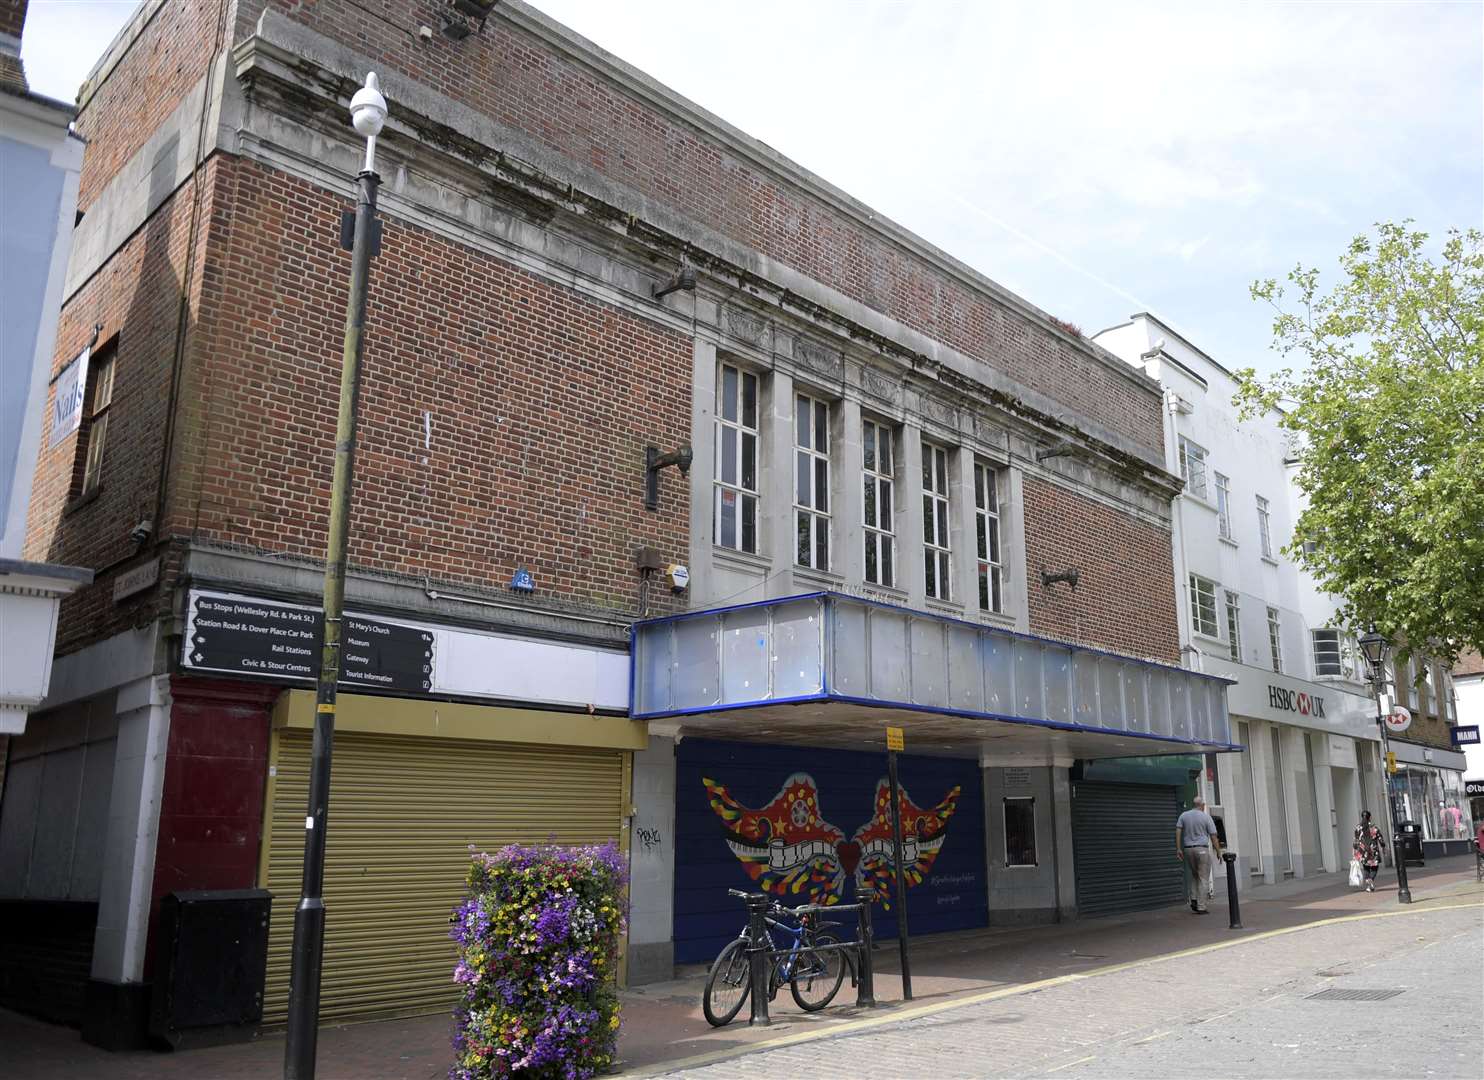 The former bingo hall's frontage will be retained as part of the development, bosses say